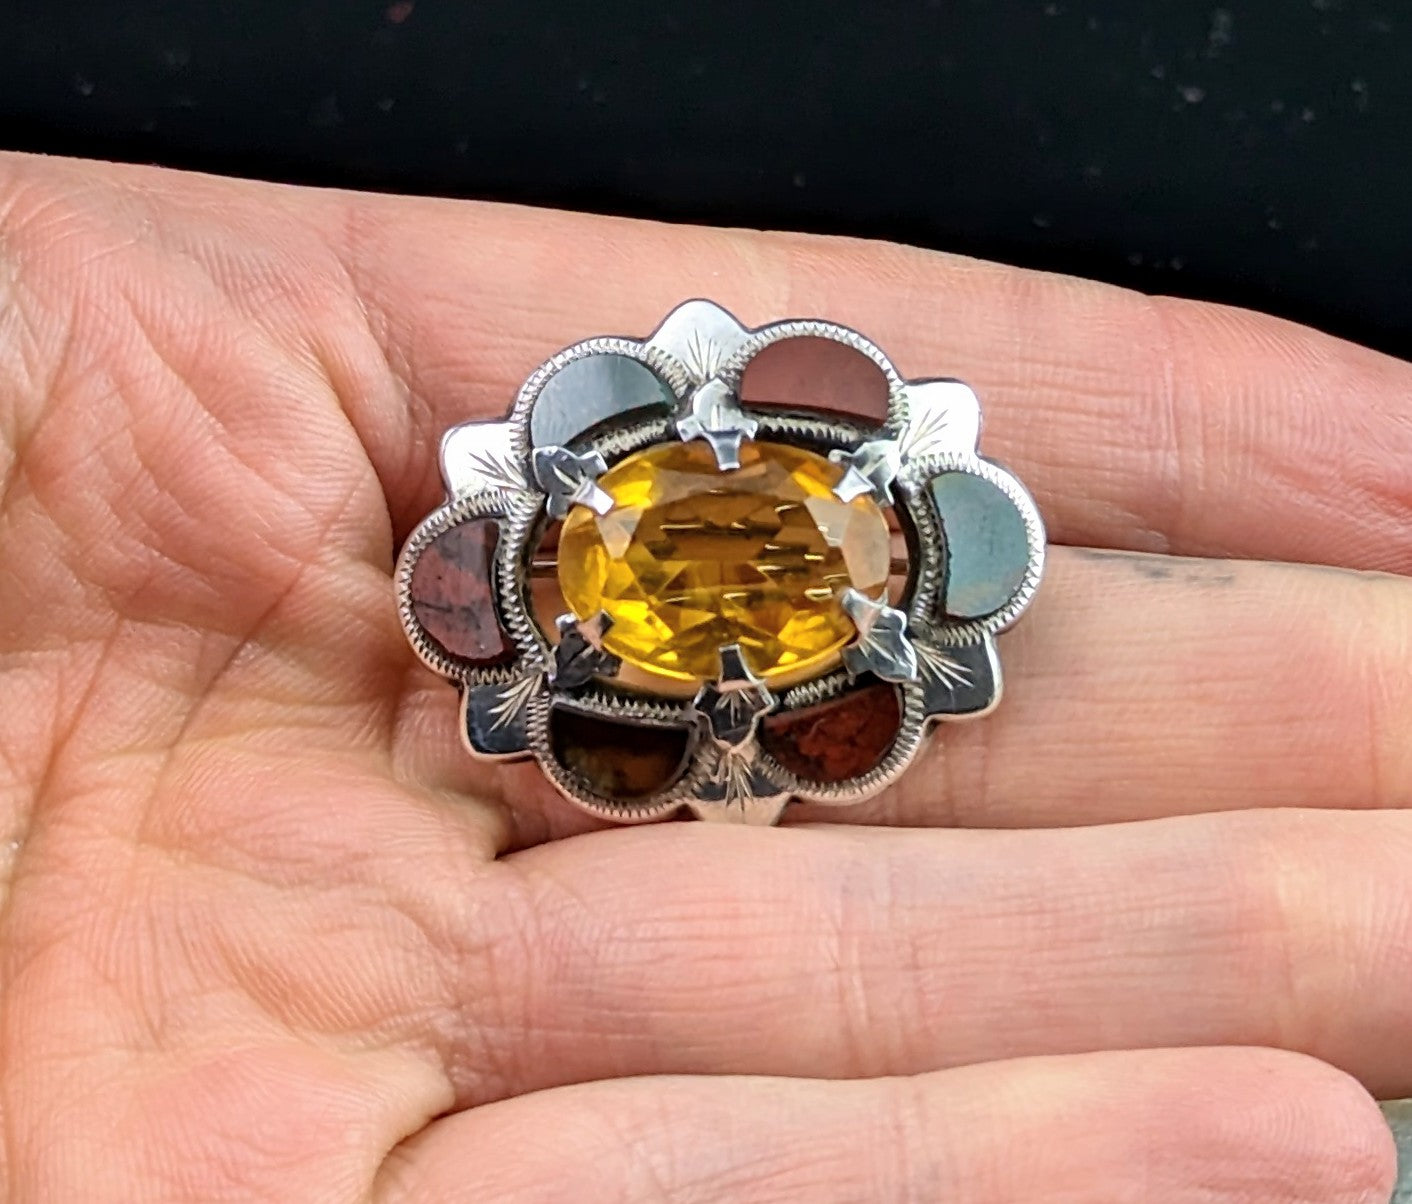 Antique Scottish agate, silver and Cairngorm citrine brooch